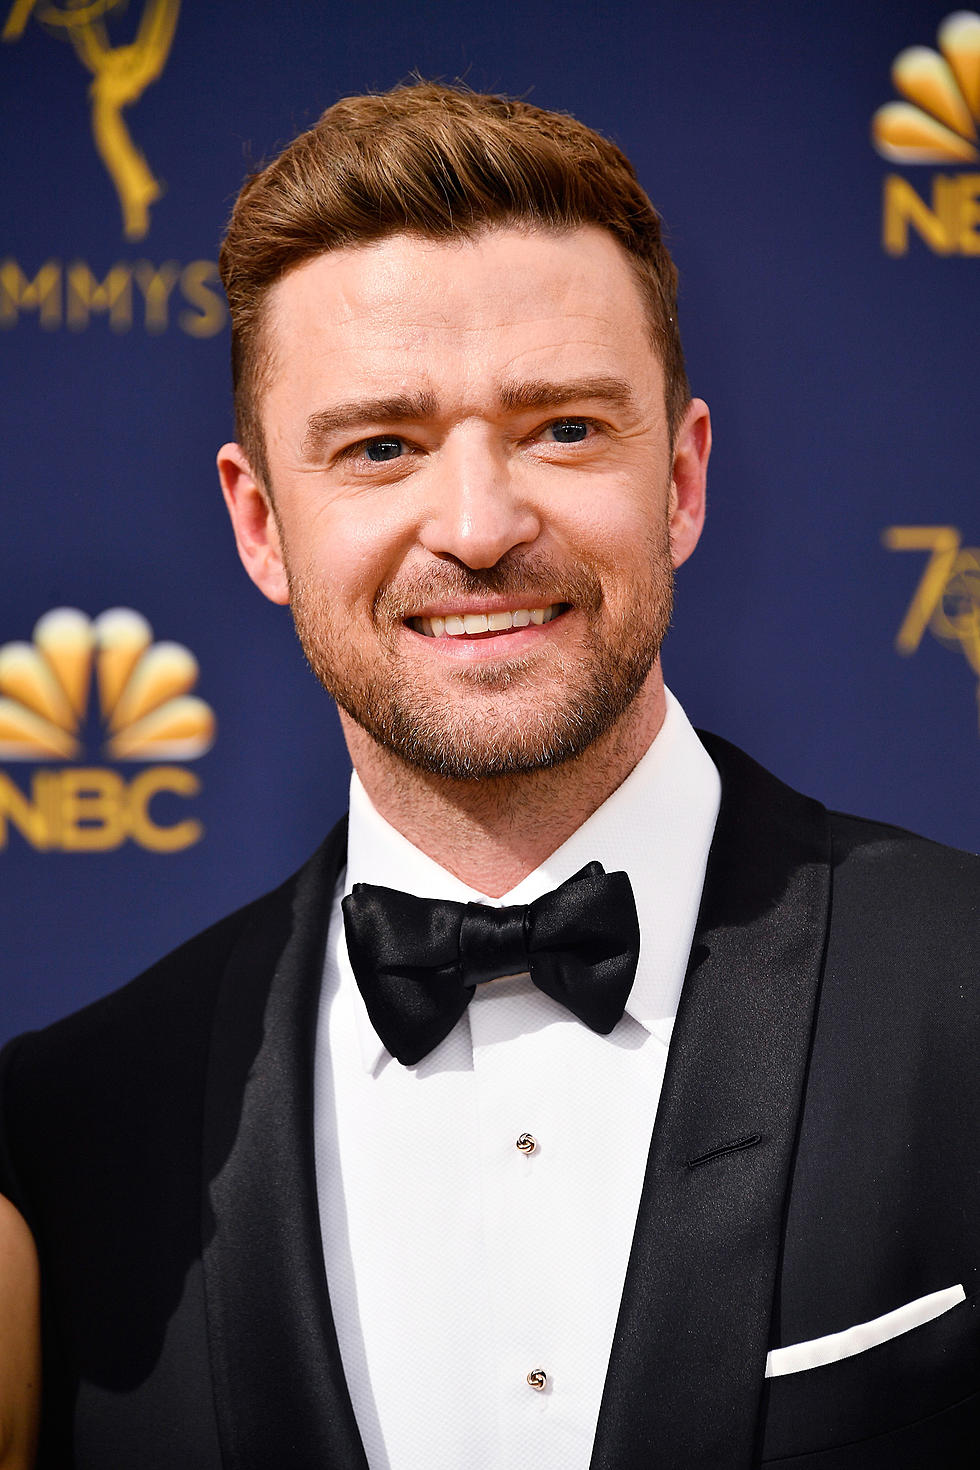 Justin Timberlake Talks To Kids, Eats Wings, and Sings with Jimmy Fallon